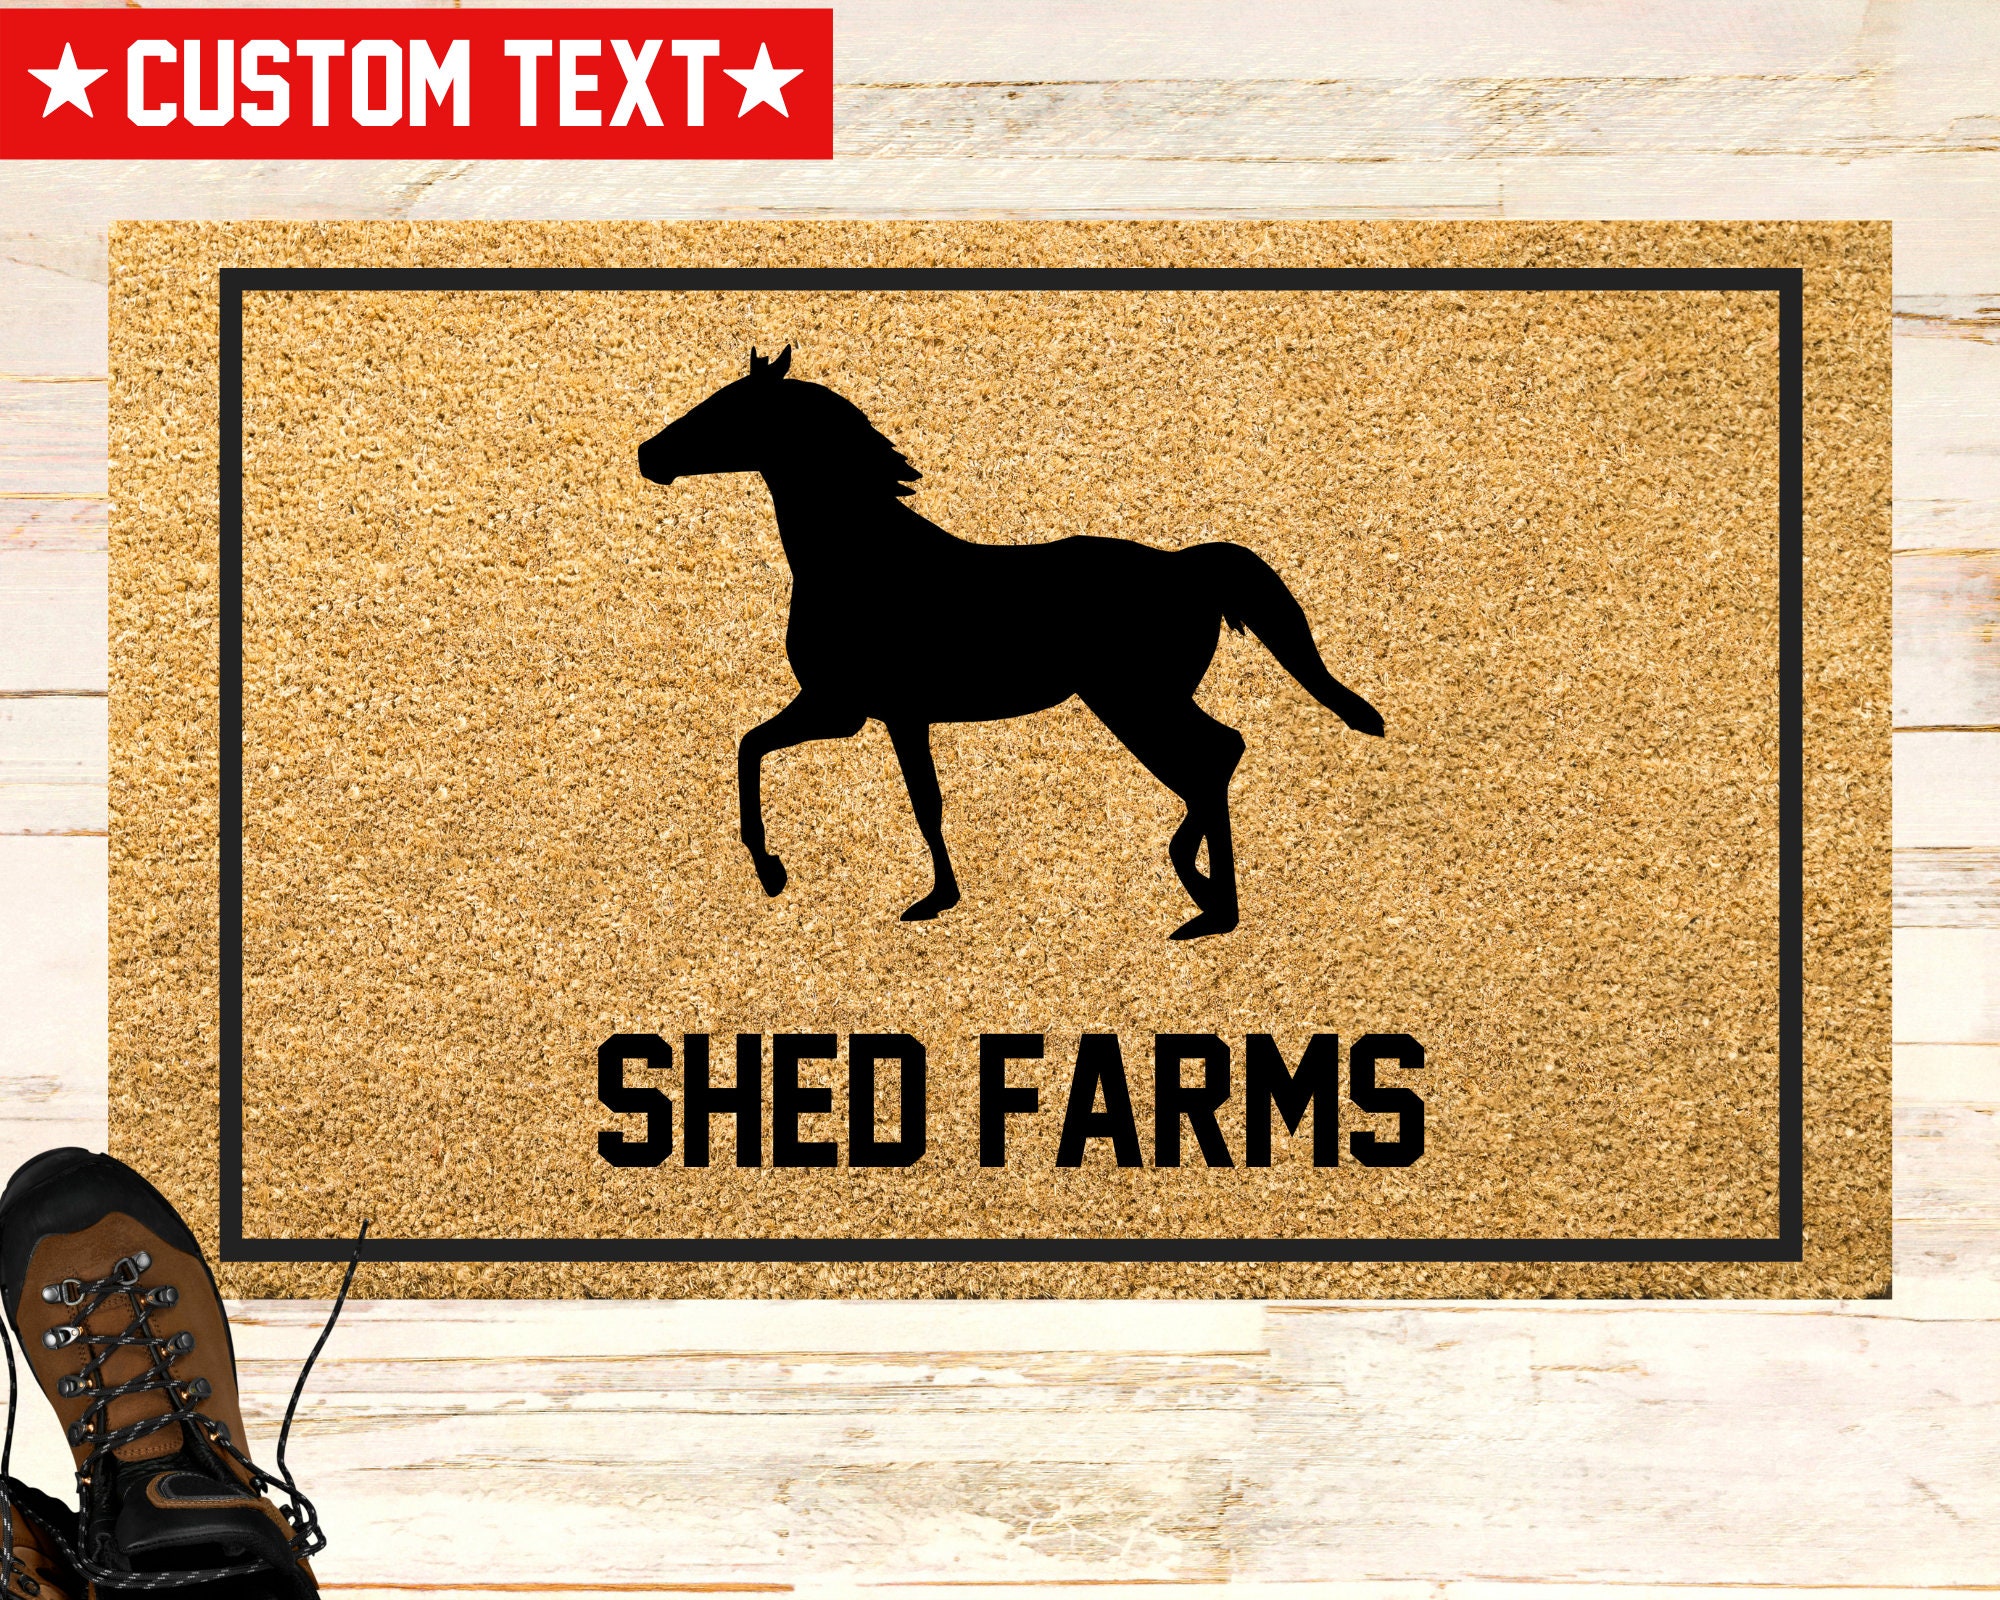 100% Coir Outdoor Welcome Mat - Horses at Fence: Chicks Discount Saddlery